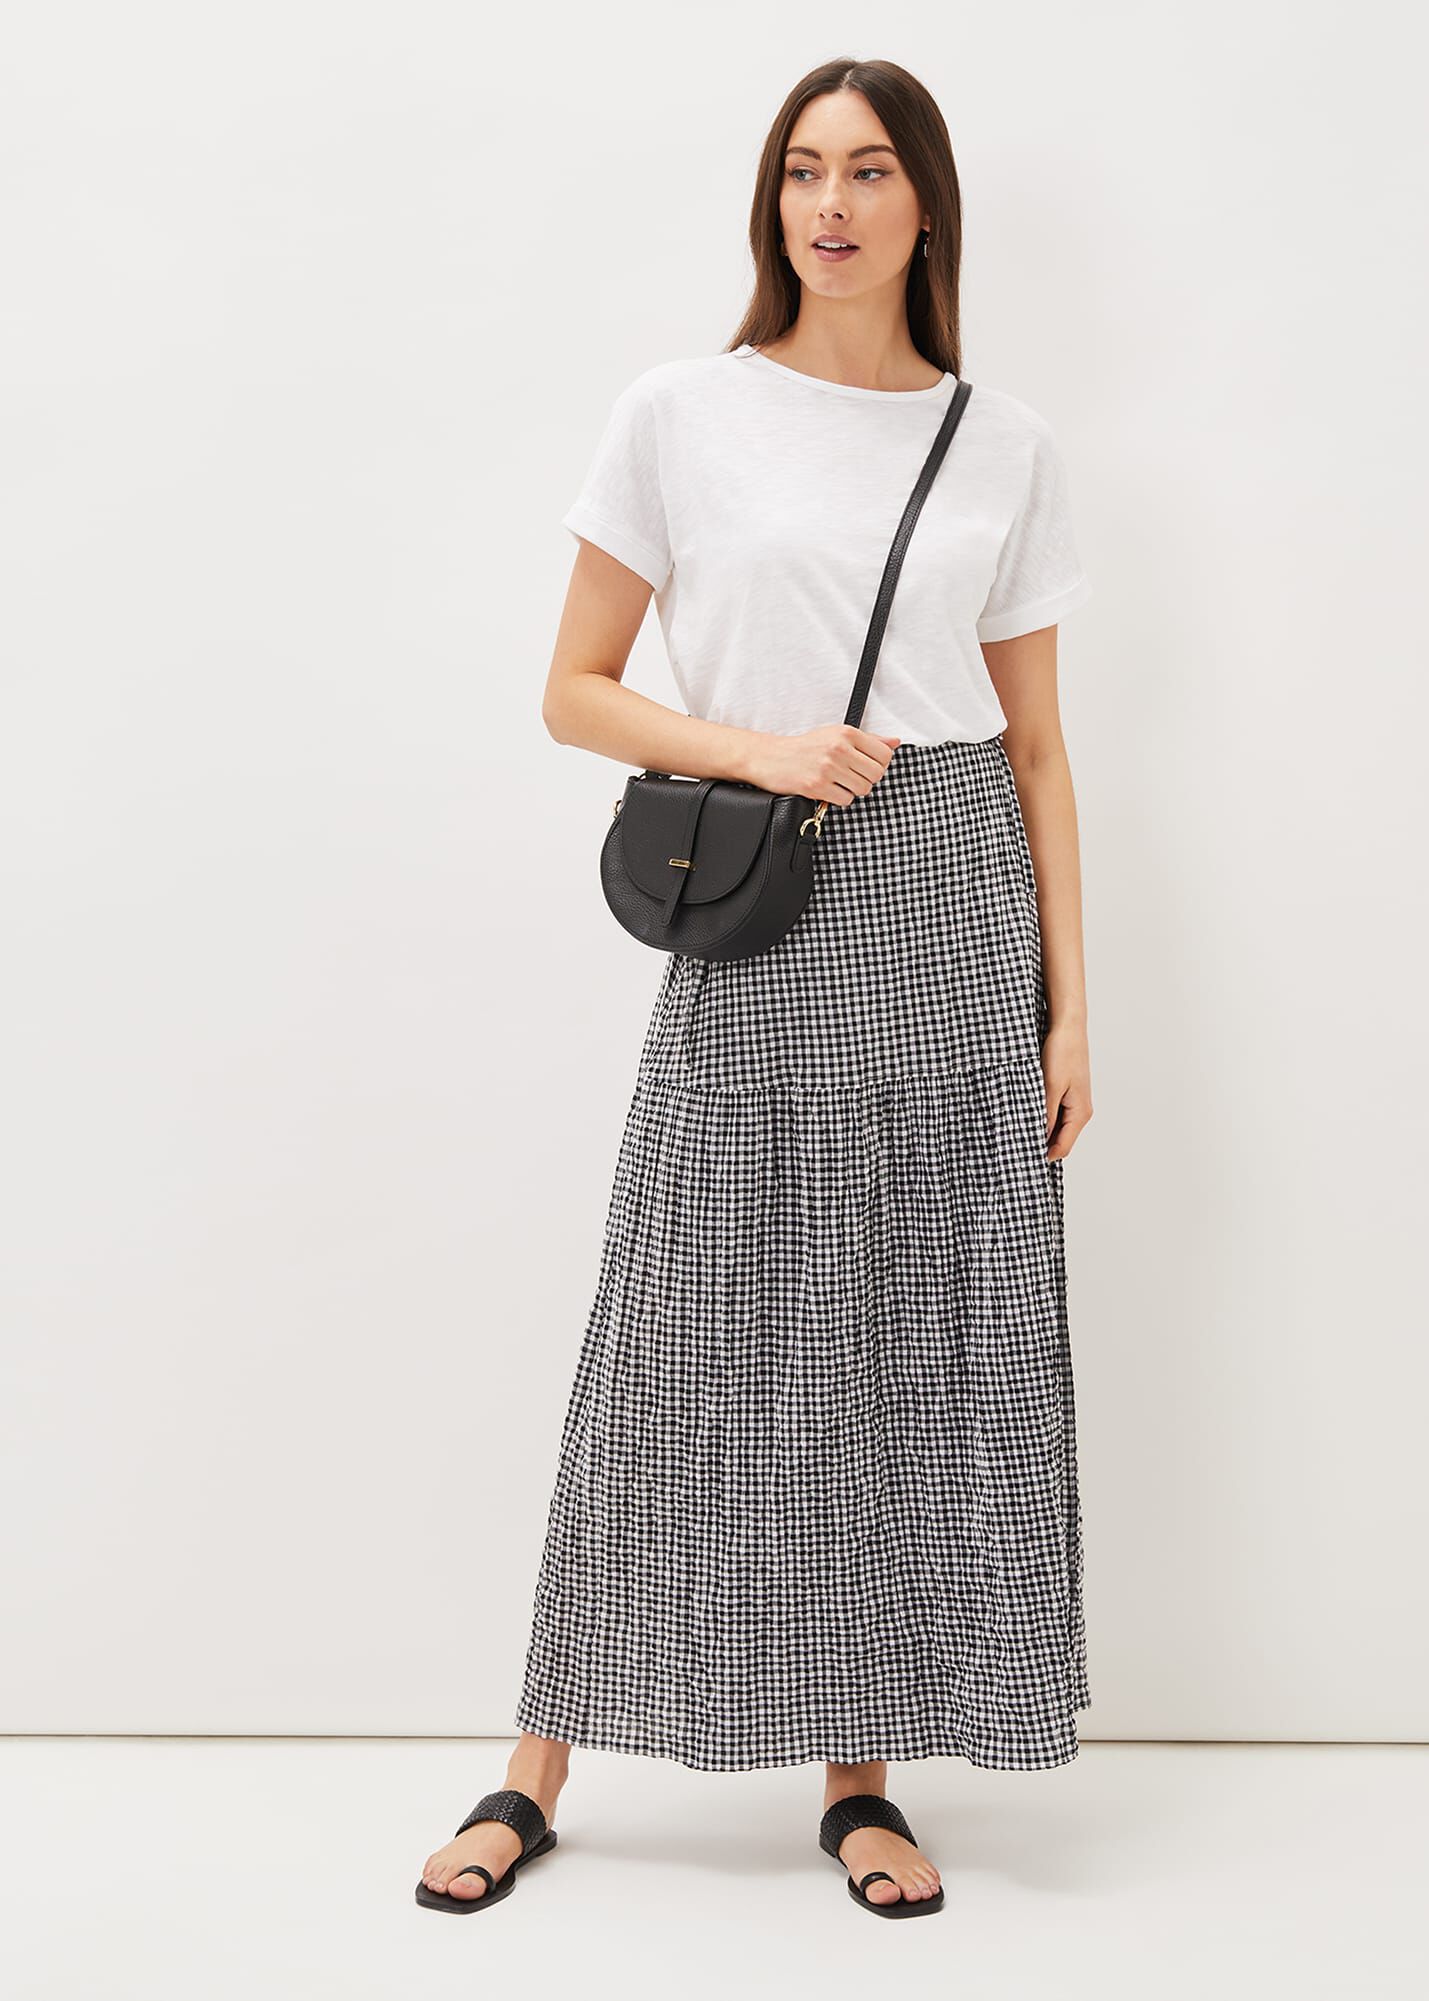 Bless Couture  And for tonights finale this GINGHAM PRINT MAXI SKIRT and  LACE ALL OVER TOP   Facebook